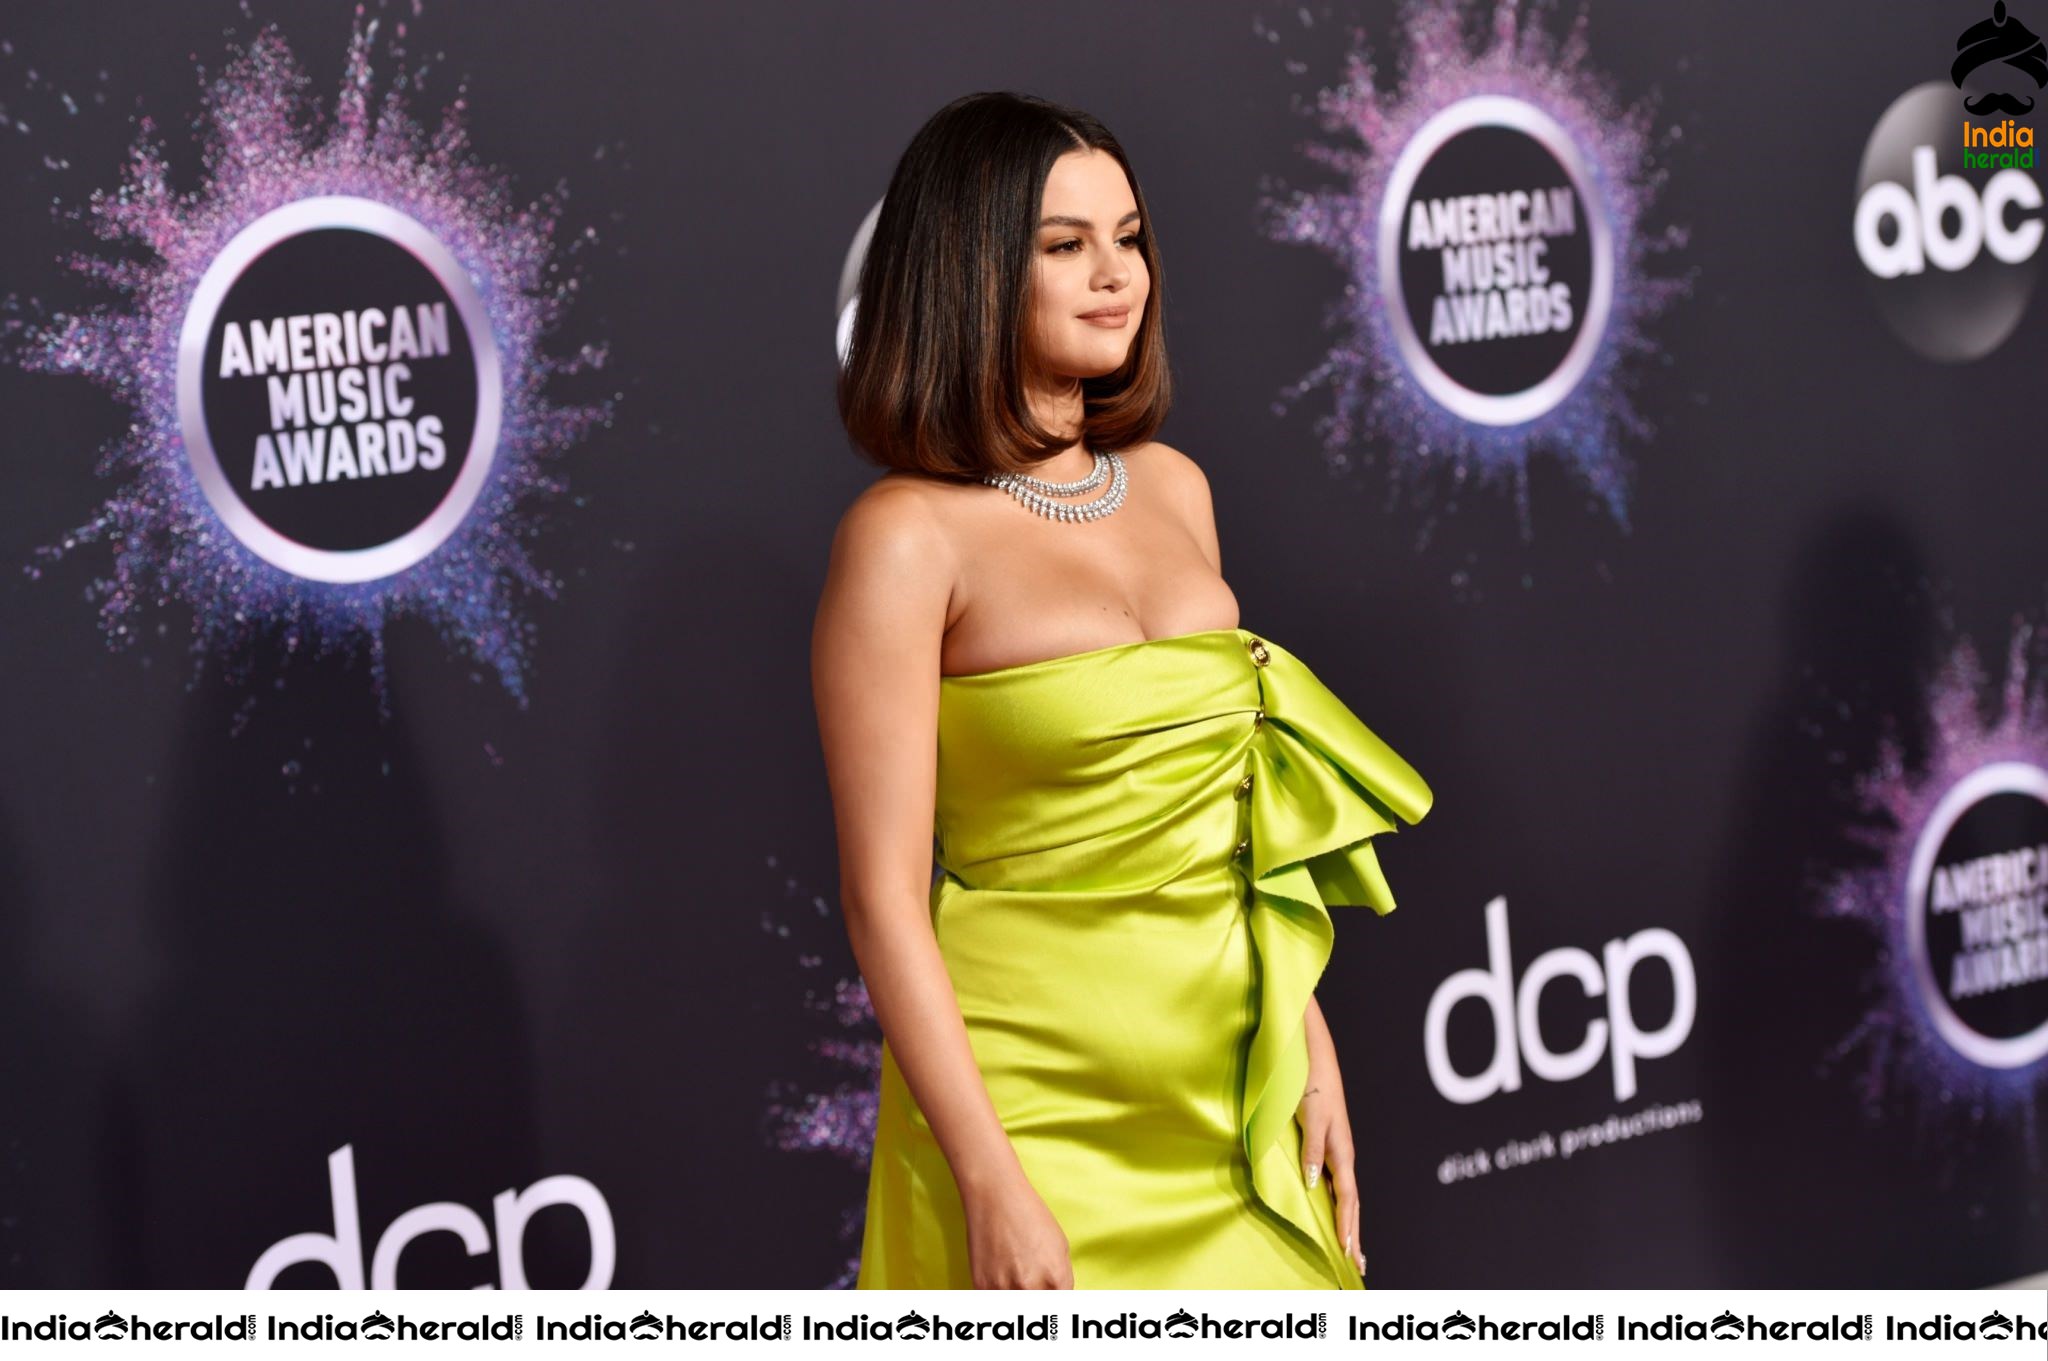 Sizzling Hot Selena Gomez shows her Hot Cleavage and Tempts us at AMC Awards Set 1